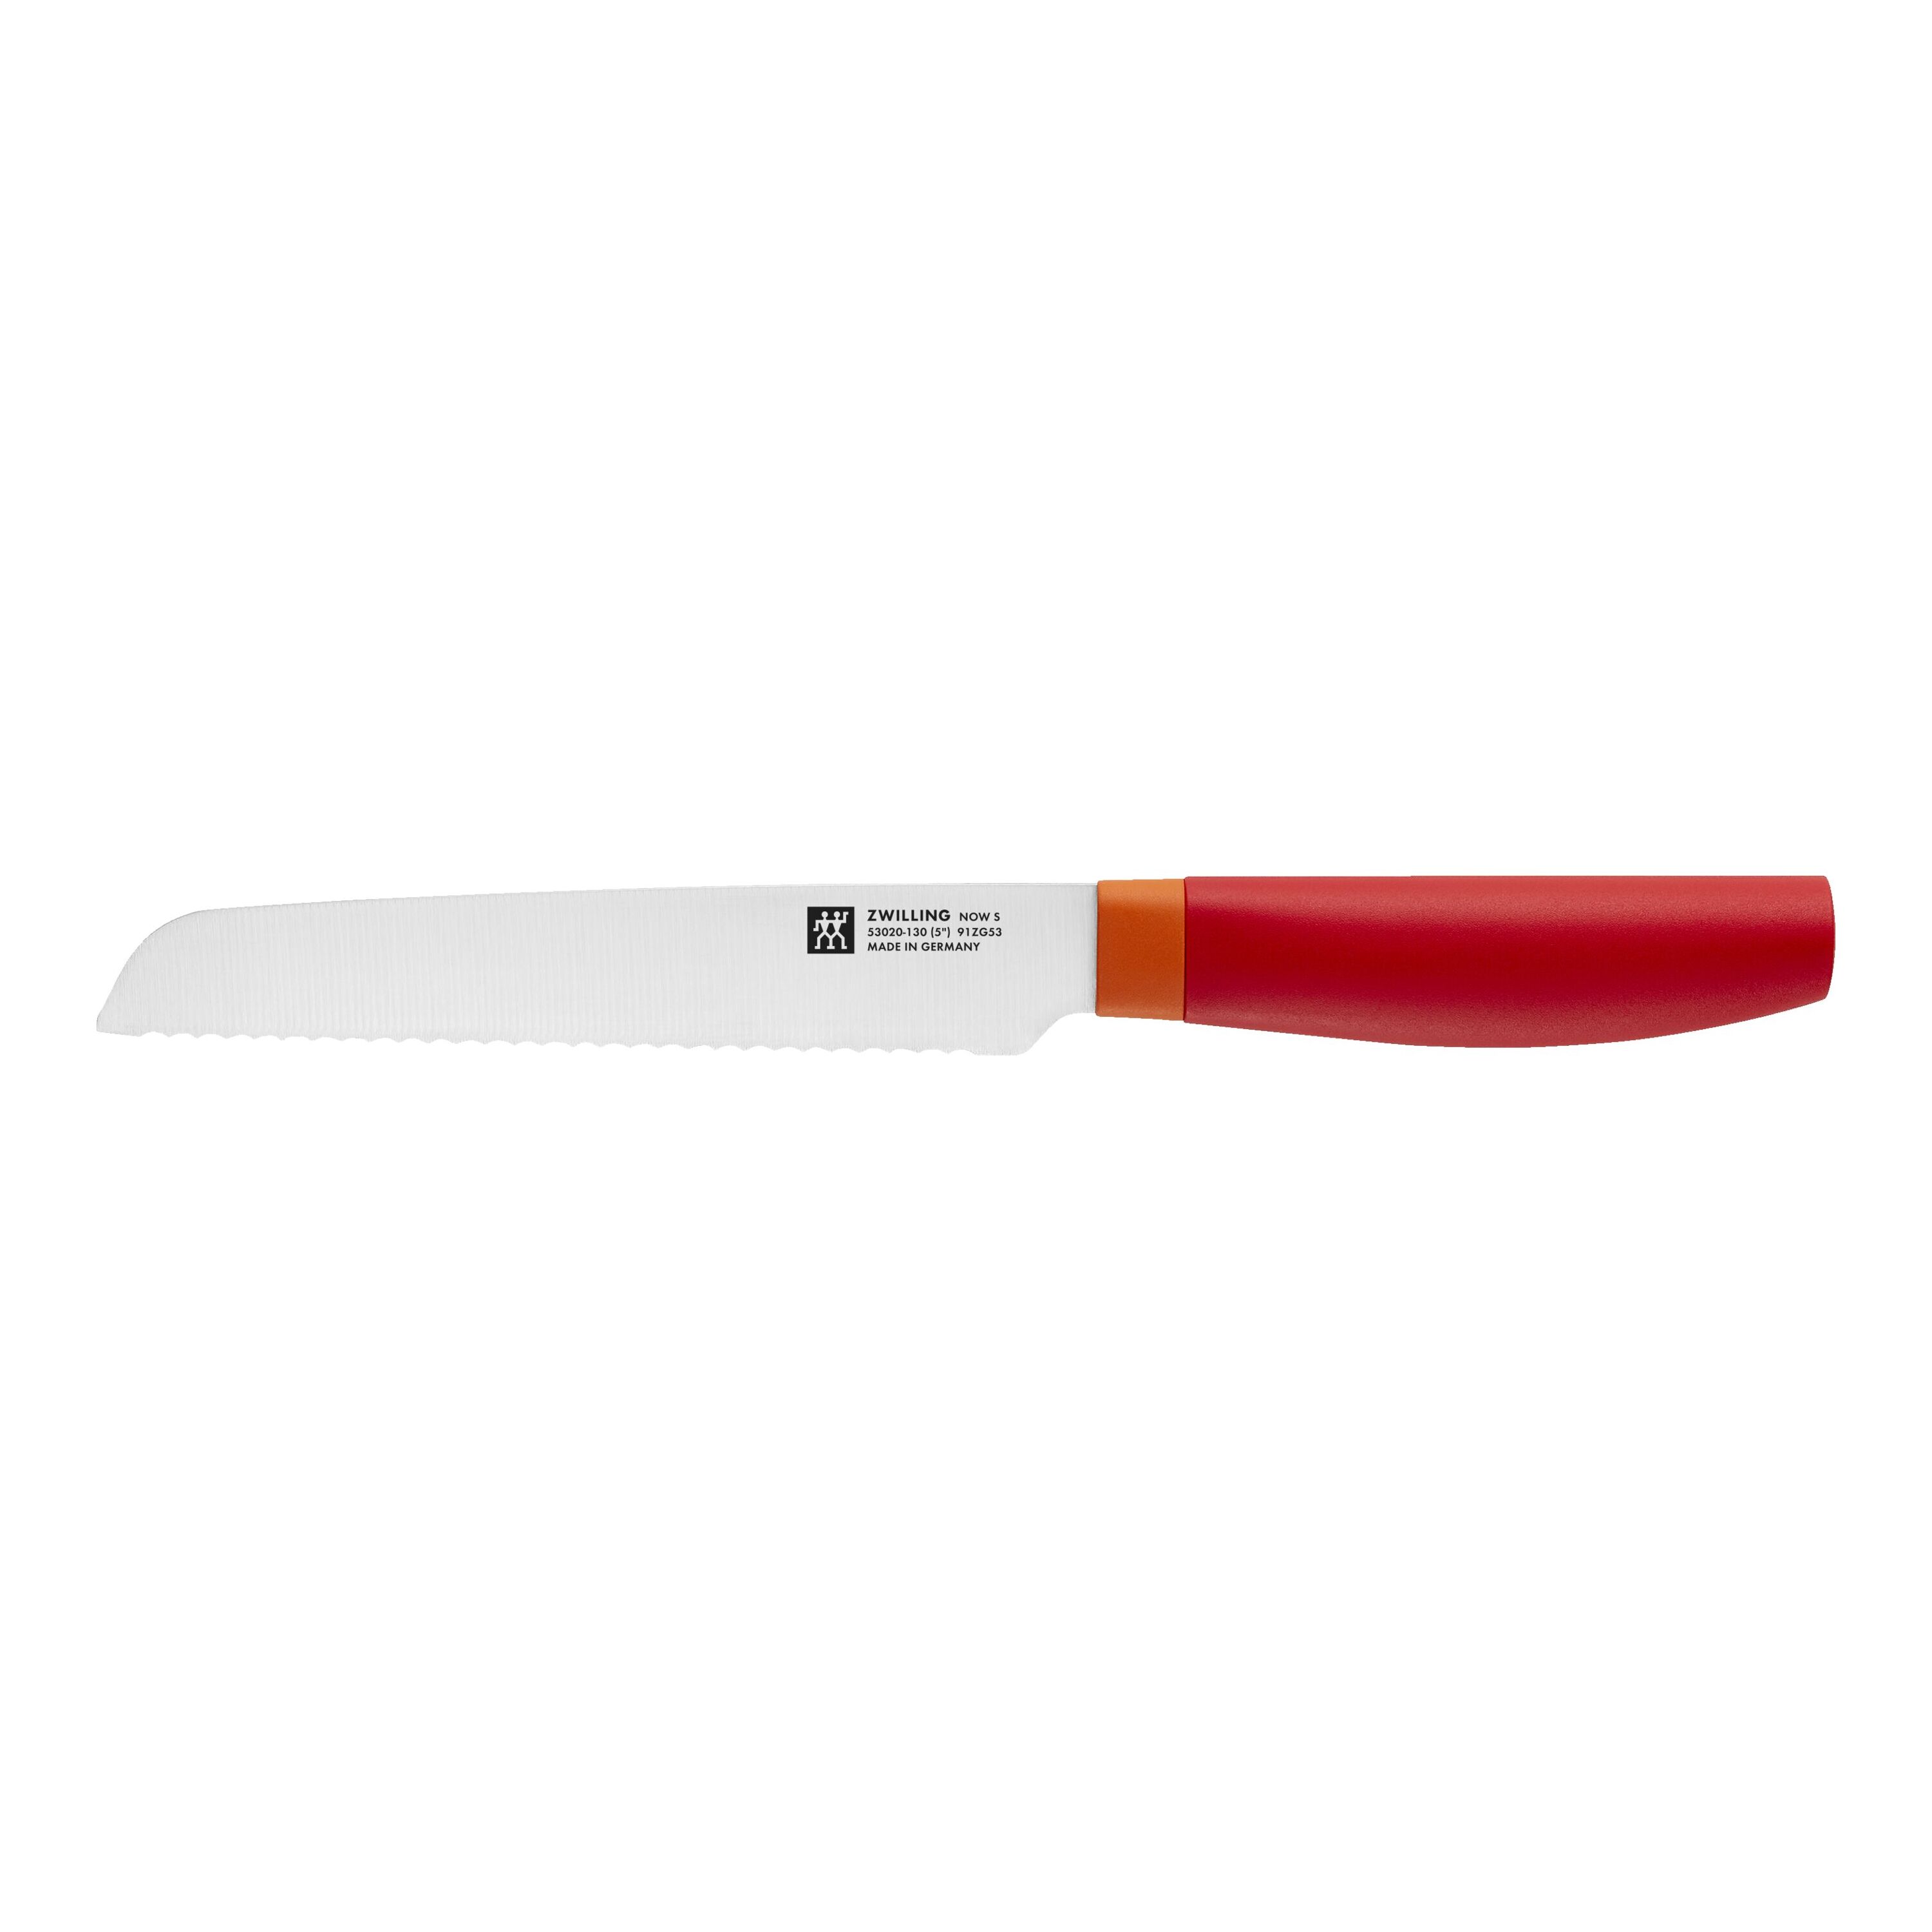 ZWILLING Now S 2-pc, Z Now S Completer Set, red